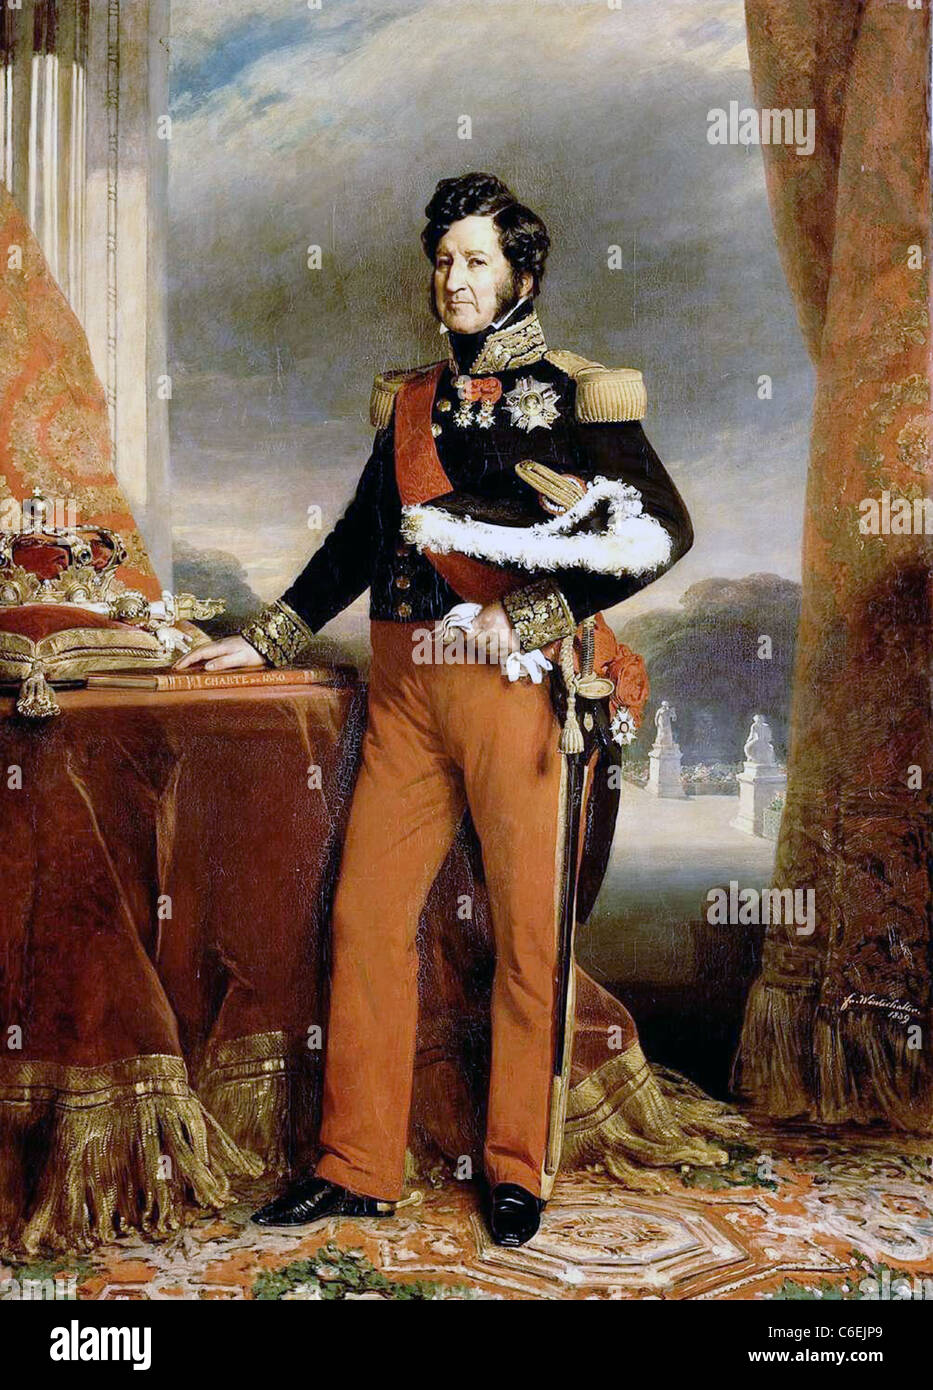 When Louis-Philippe, duke of Orleans, visited New Orleans, Entertainment/Life